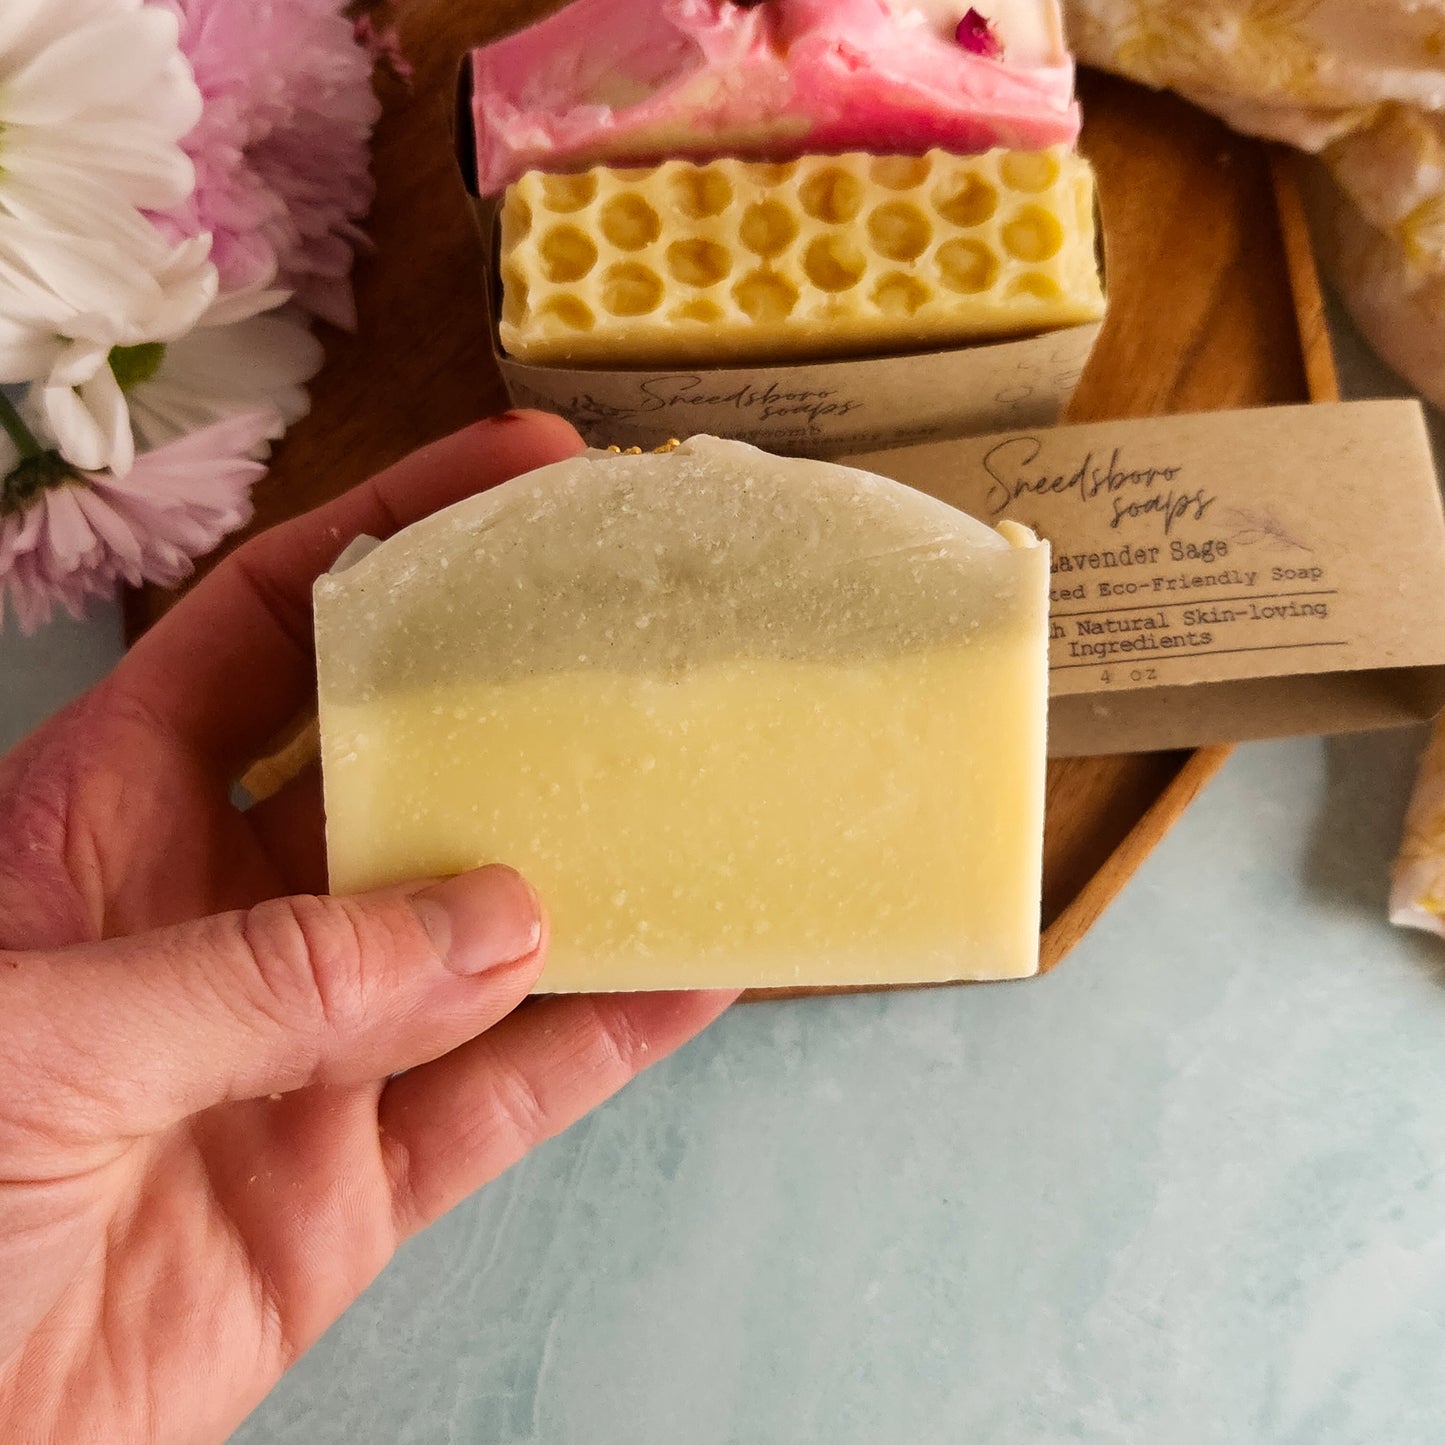 Spring Soaps - Set of 3 - Gift for Mom